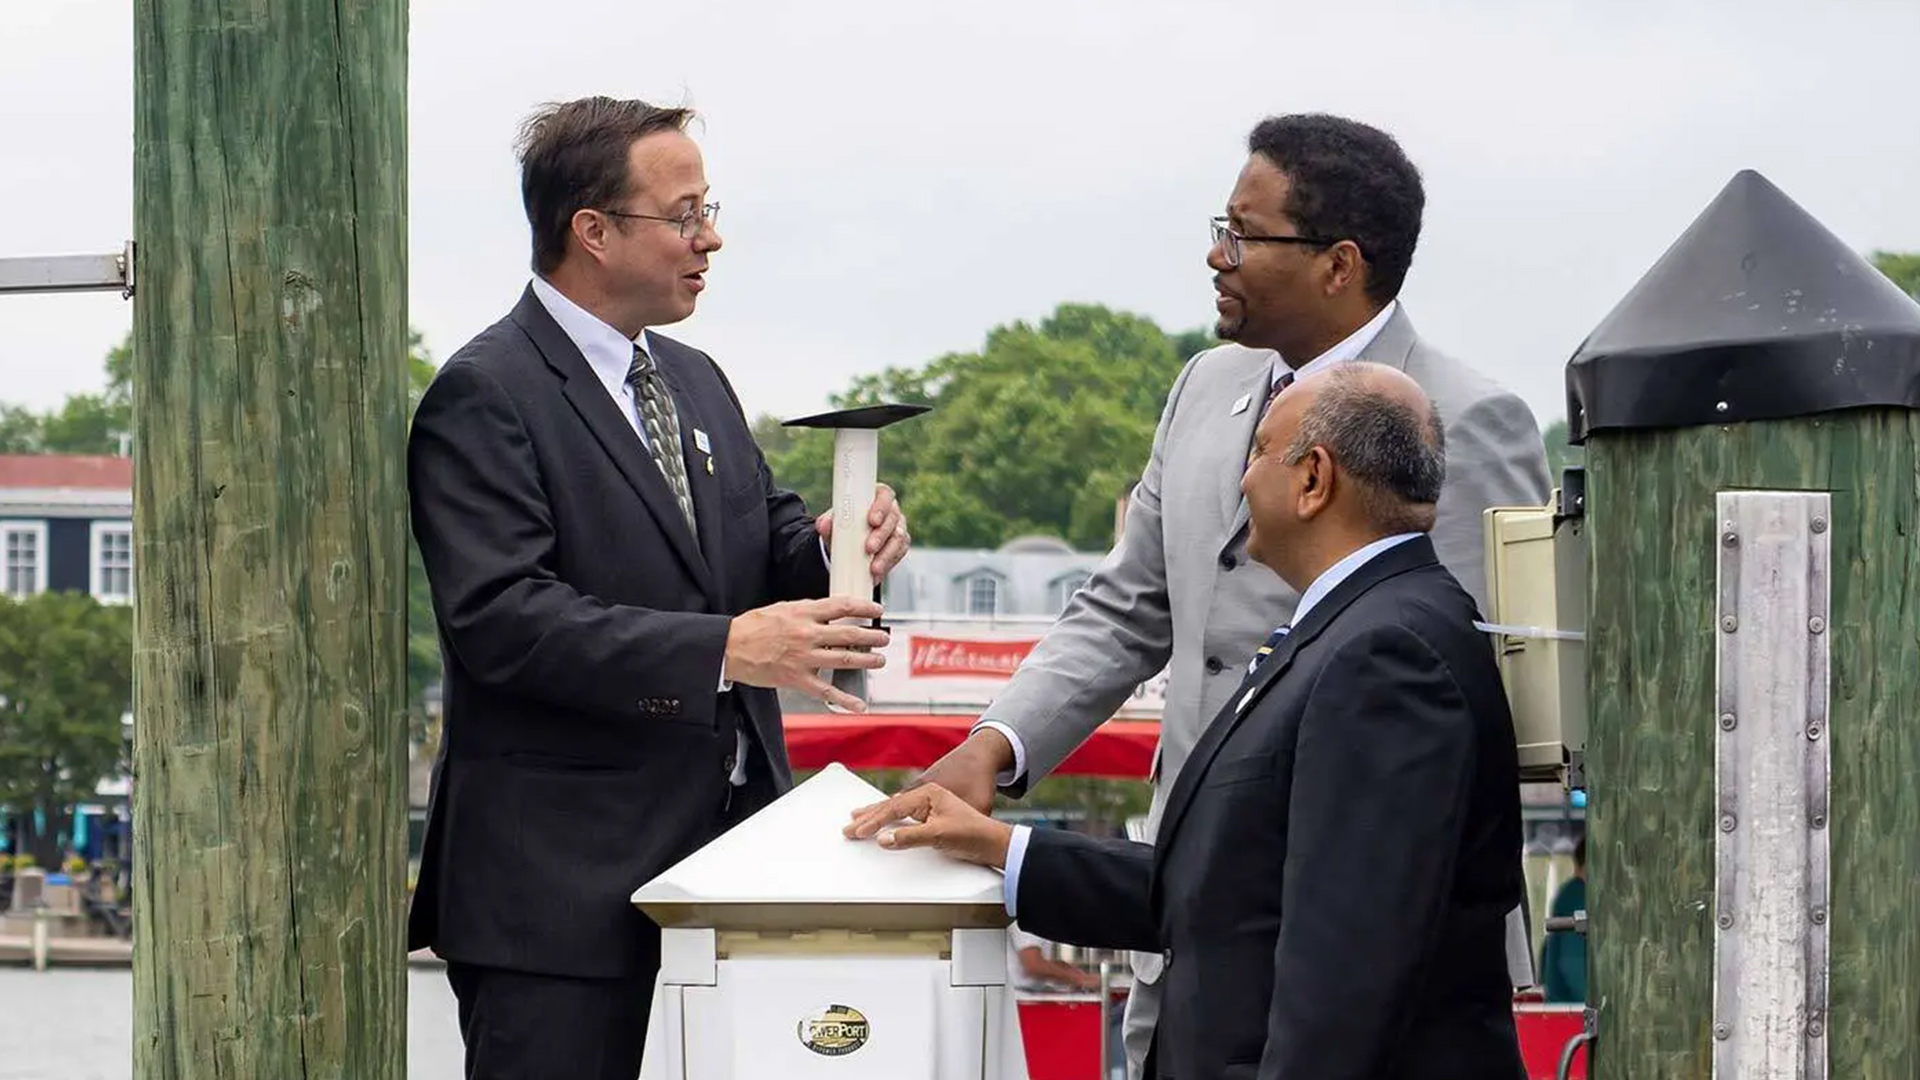 Atmospheric and oceanic science Associate Professor Tim Canty, UMD President Darryll J. Pines and College of Computer, Mathematical, and Natural Sciences Dean Amitabh Varshney discuss the technology behind a newly installed water level sensor that will help Annapolis leaders prepare for future floods. The sensor is part of UMD's Maryland HydroNet, a Grand Challenges Grant-funded project.